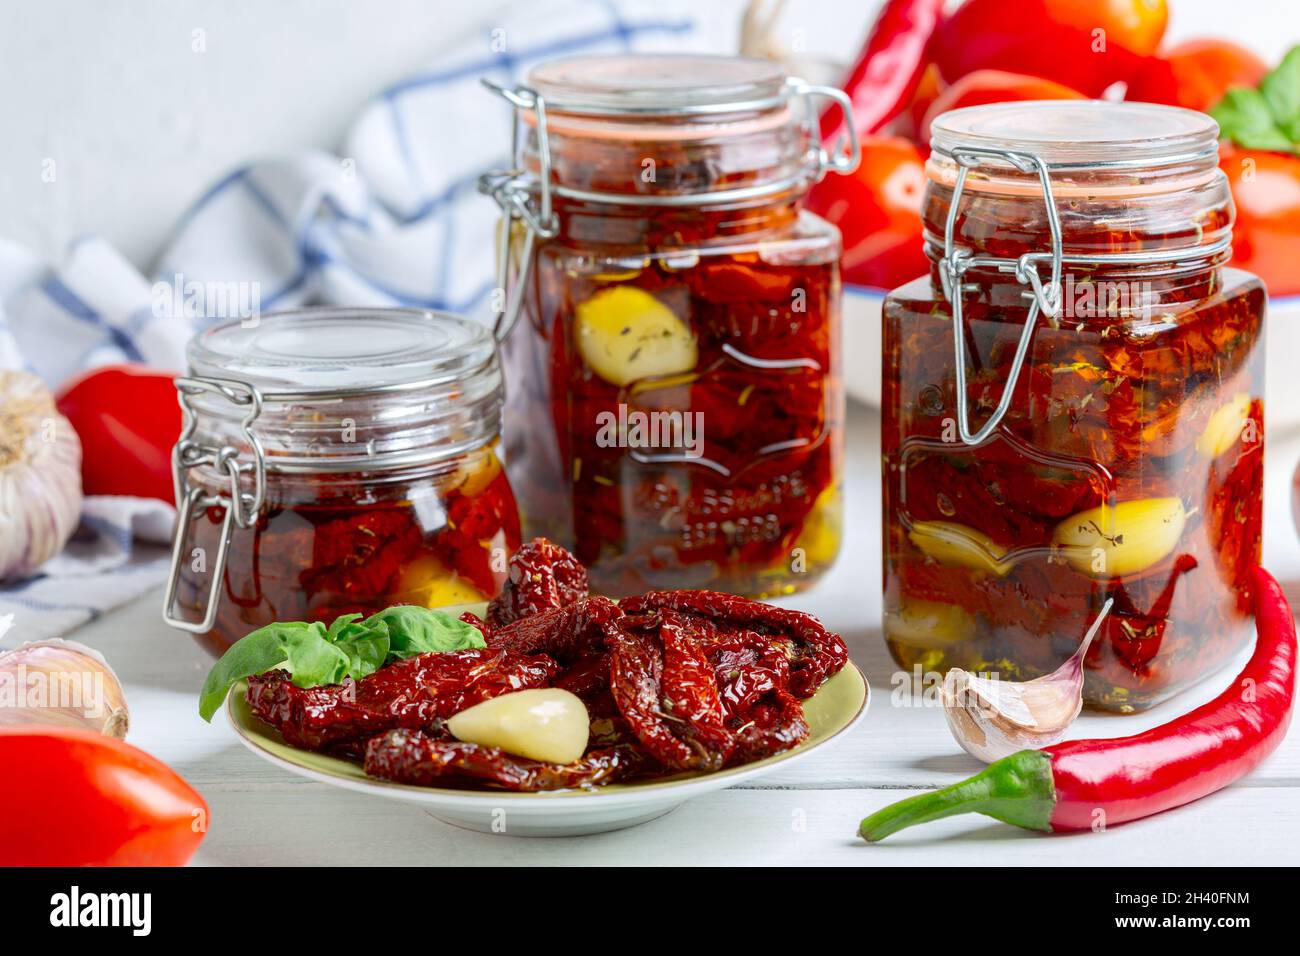 Dried tomatoes with herbs and olive oil. Stock Photo